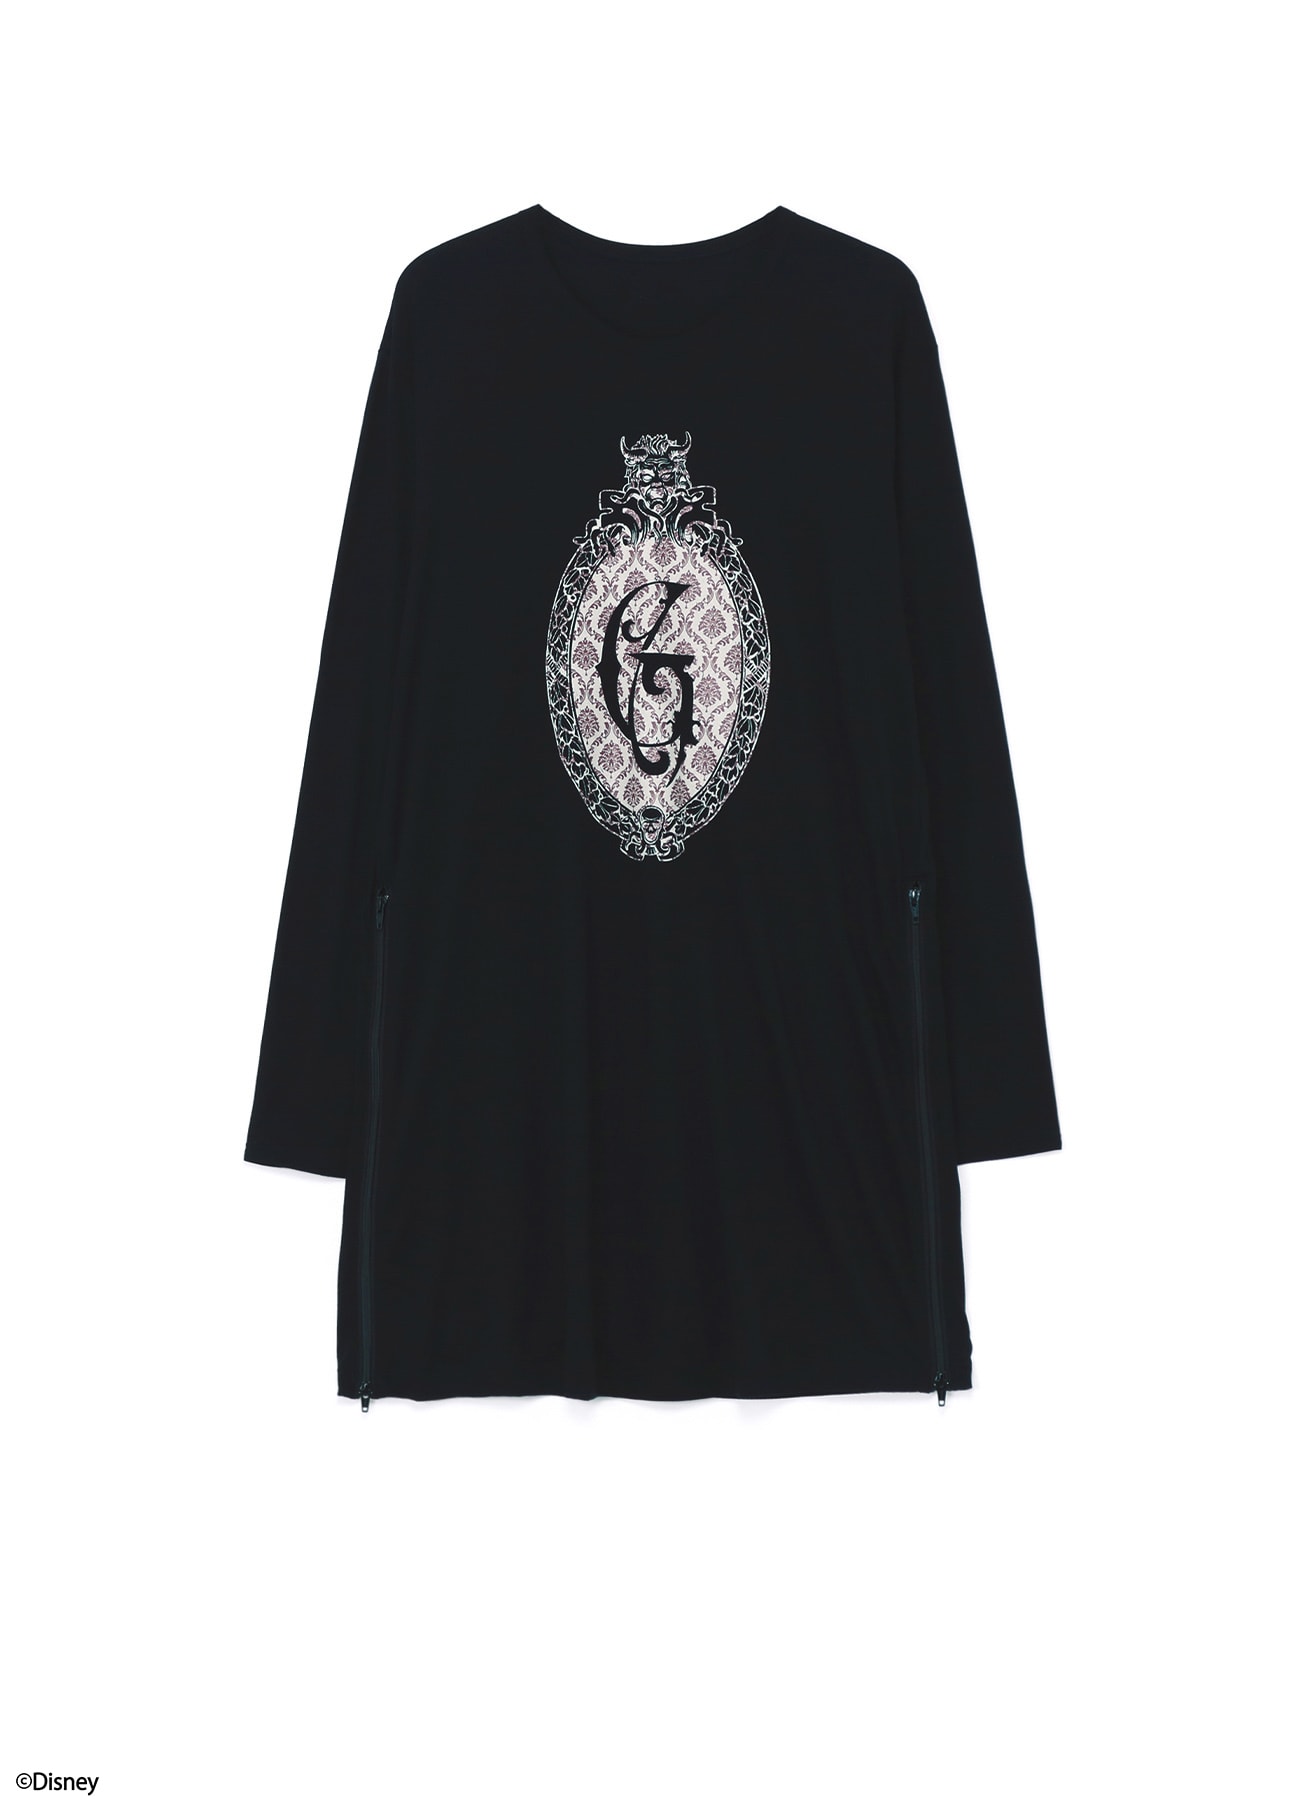 Ground Y/Haunted Mansion collection [WALL PLAQUE LONG BIG T-SHIRT]